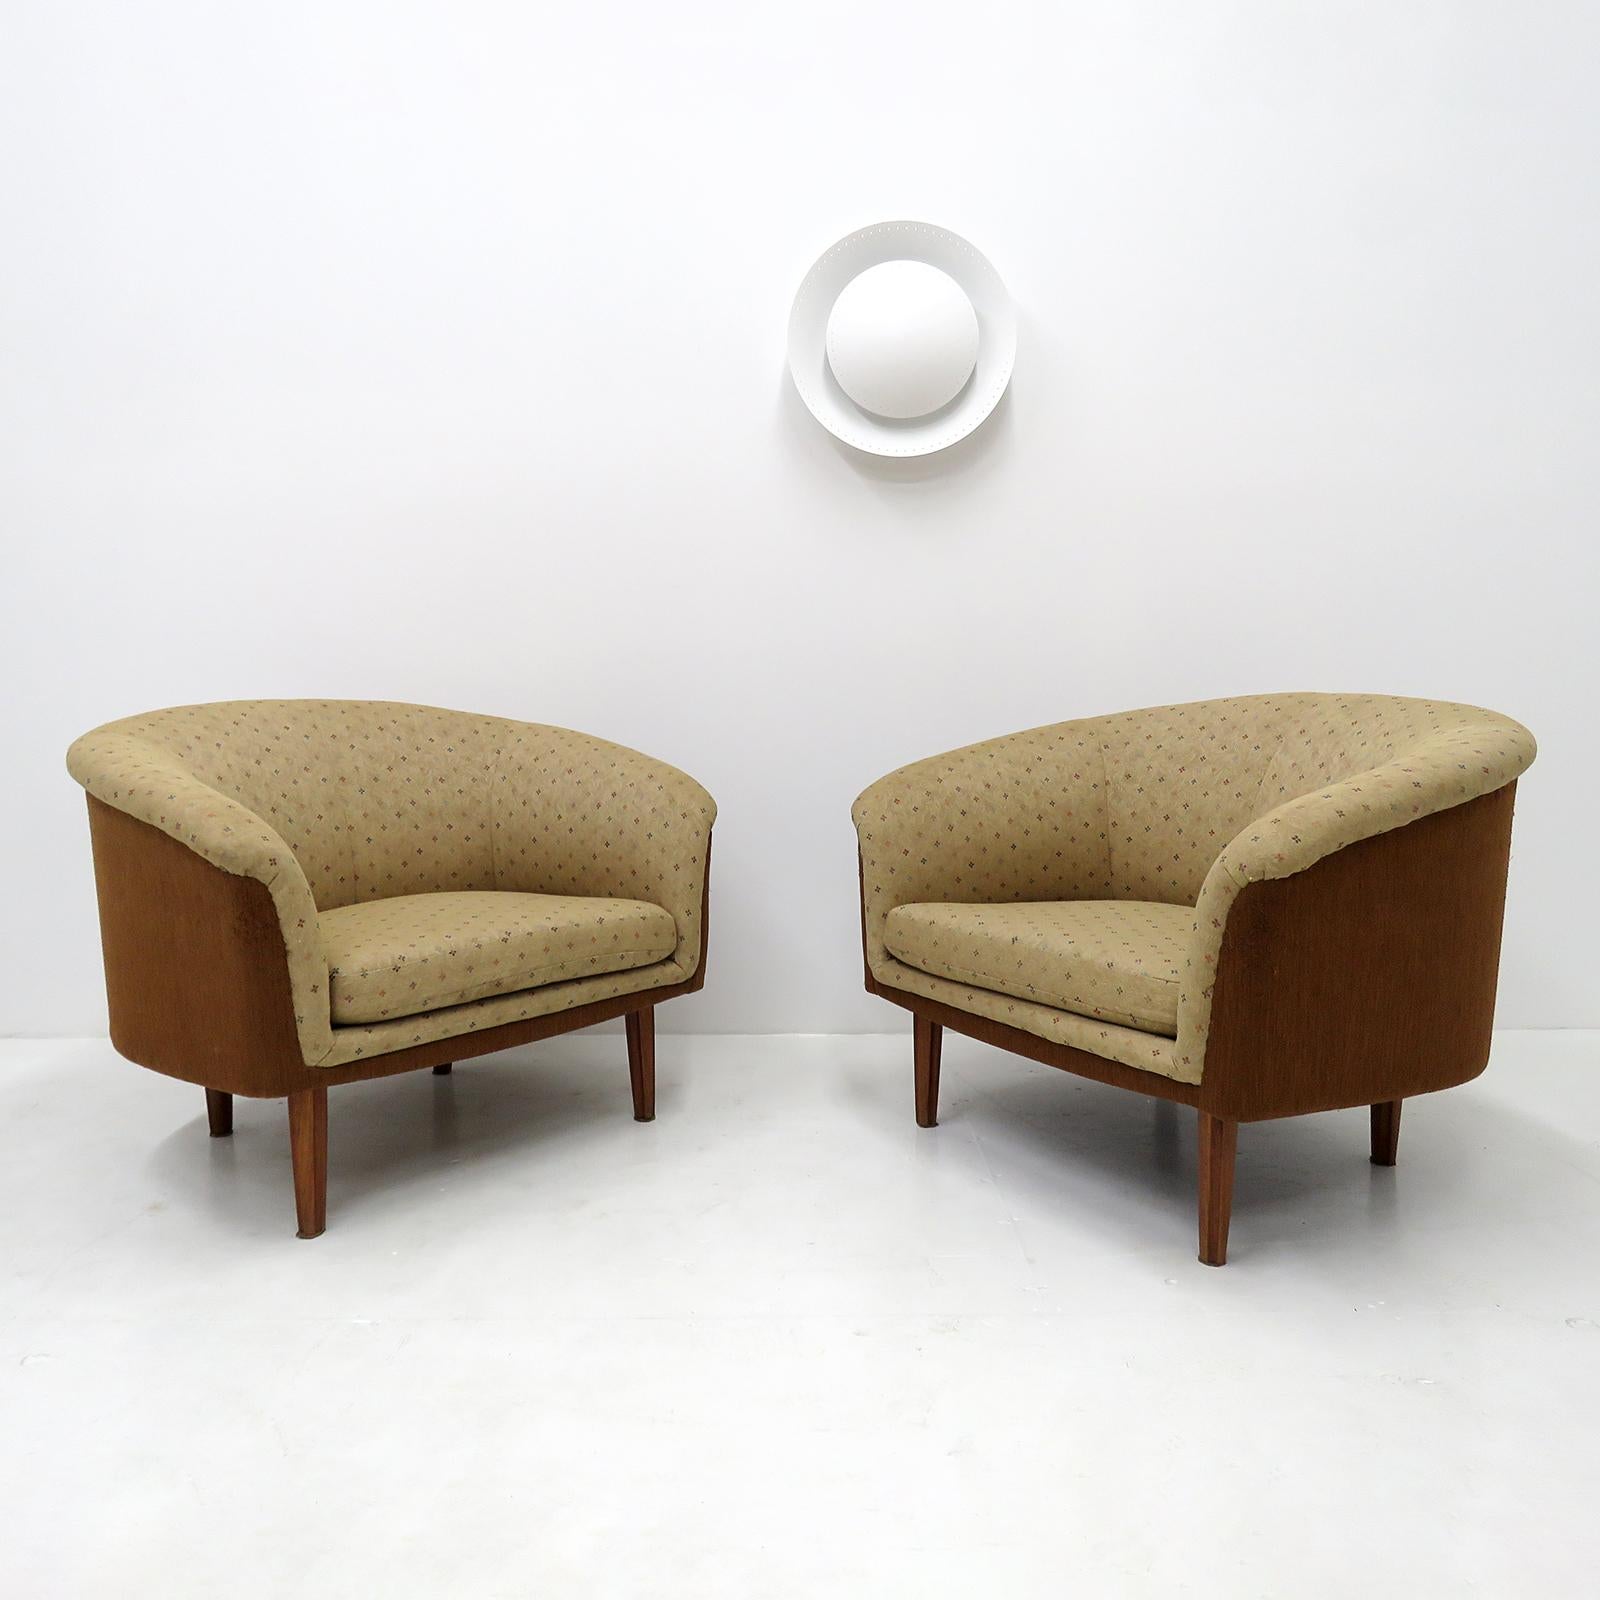 Pair of Swedish Oversized Lounge Chairs, 1960 For Sale 3